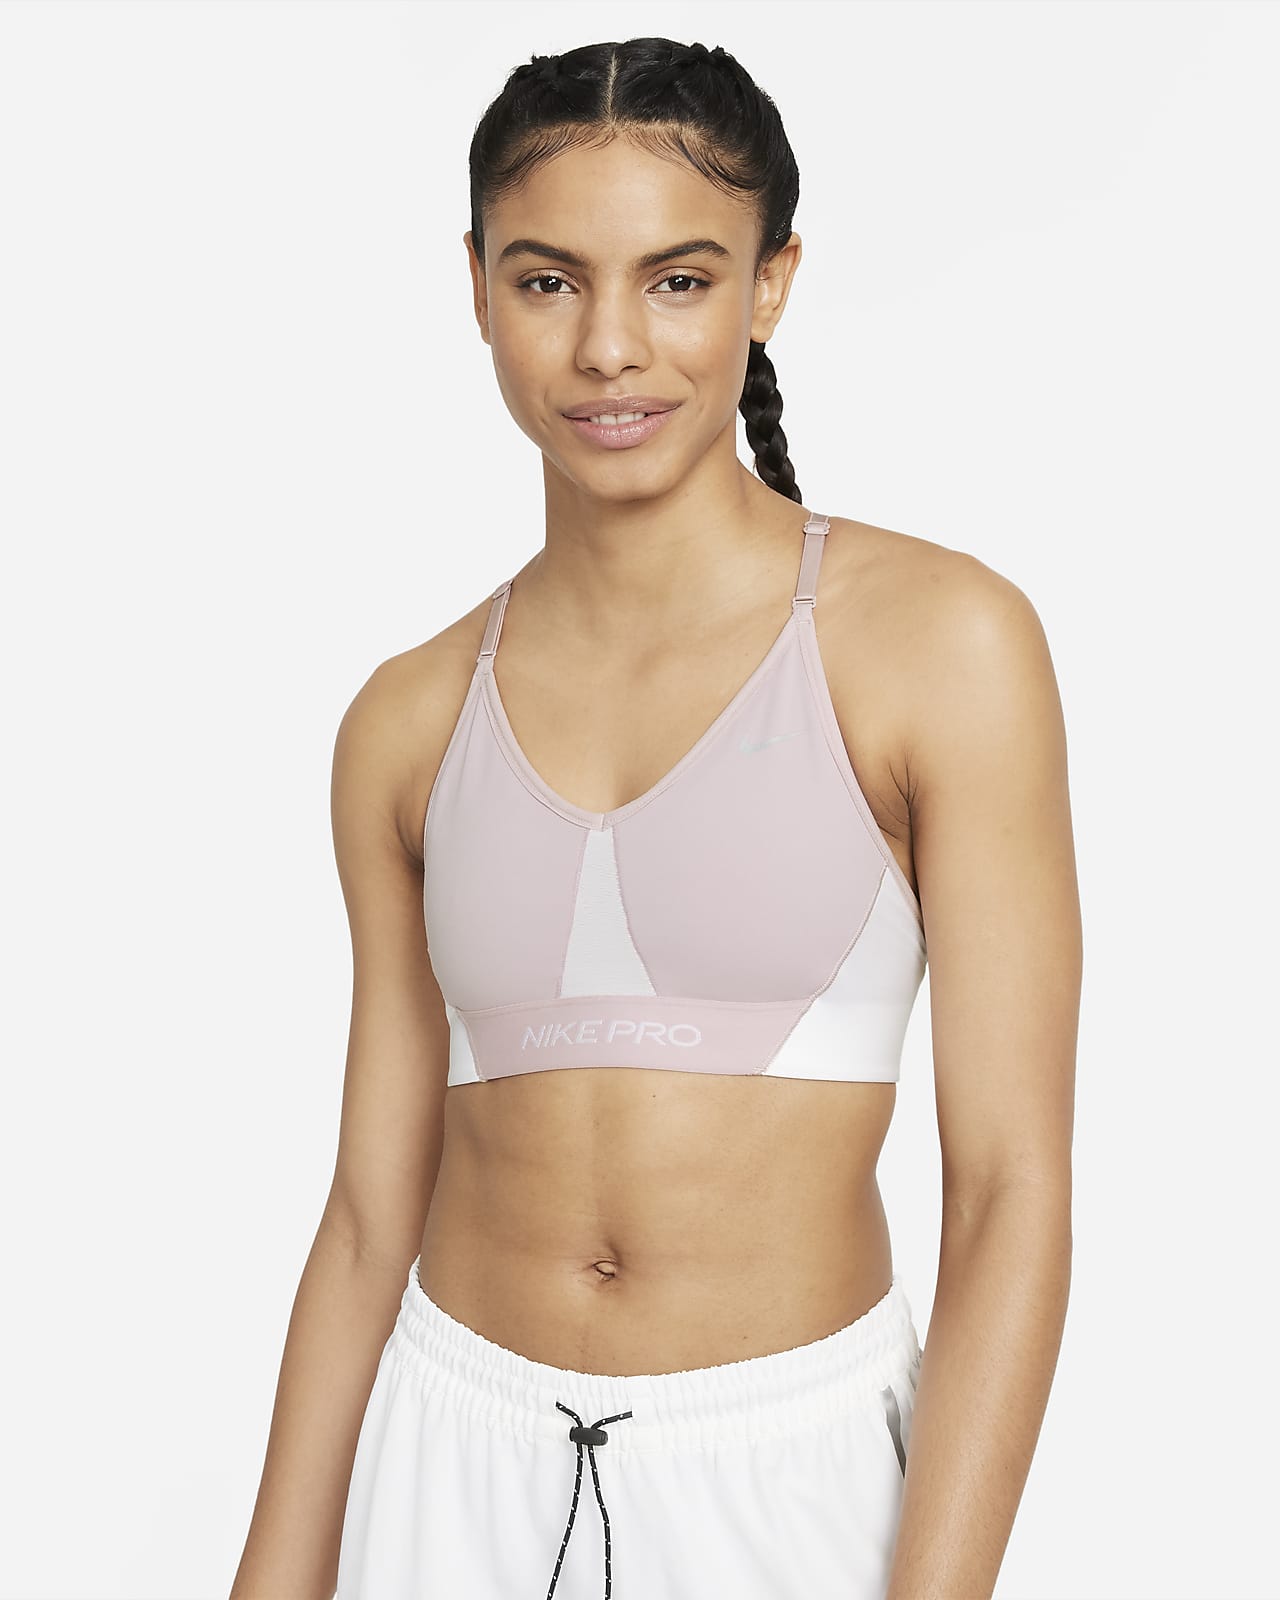 Nike Pro Indy Portugal, SAVE 36% -